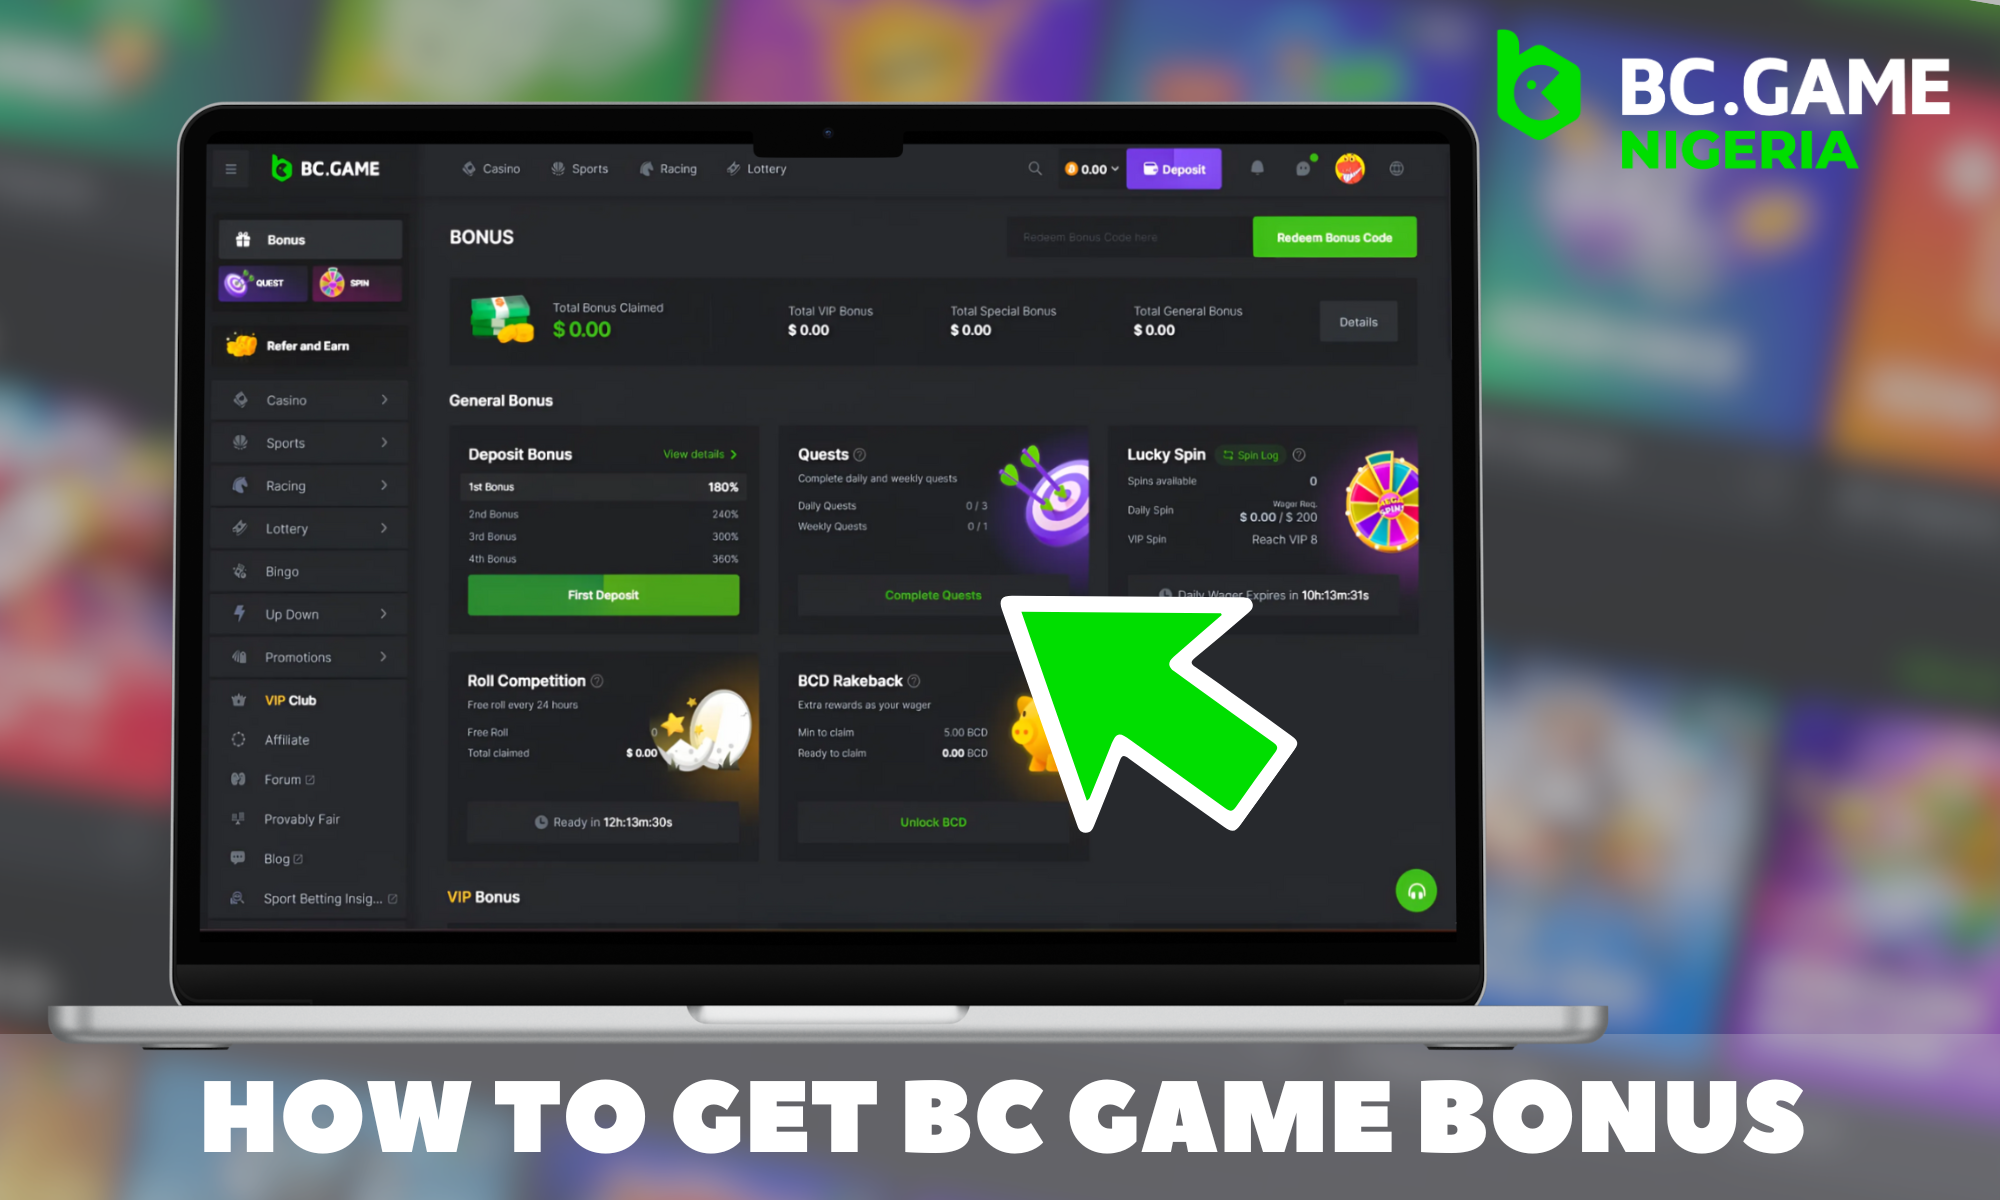 Step-by-step instructions for receiving bonuses in BC Game